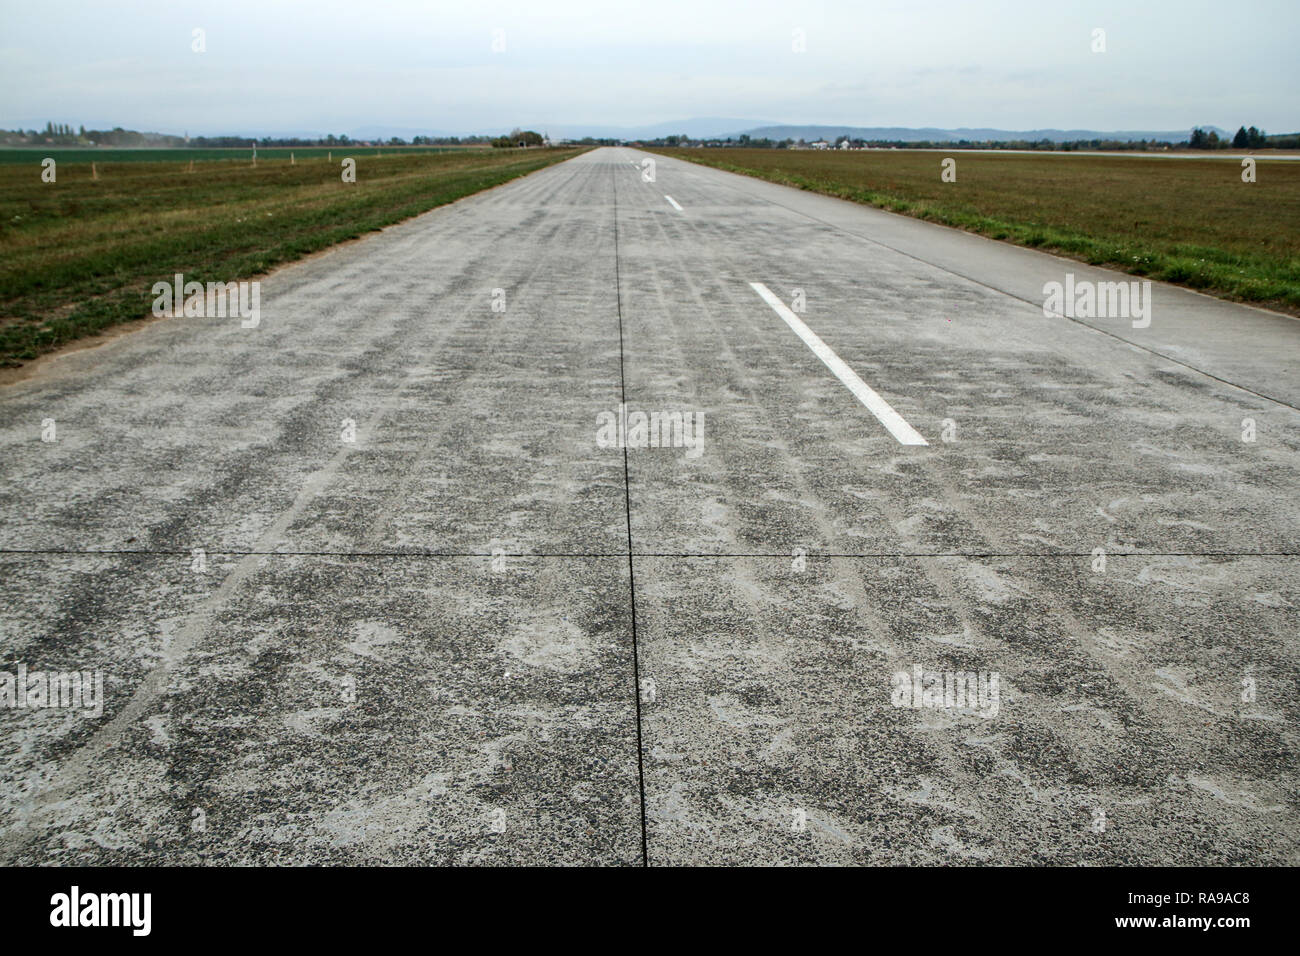 A picture of an empty long old airport runway made from conrcrete panels. Stock Photo